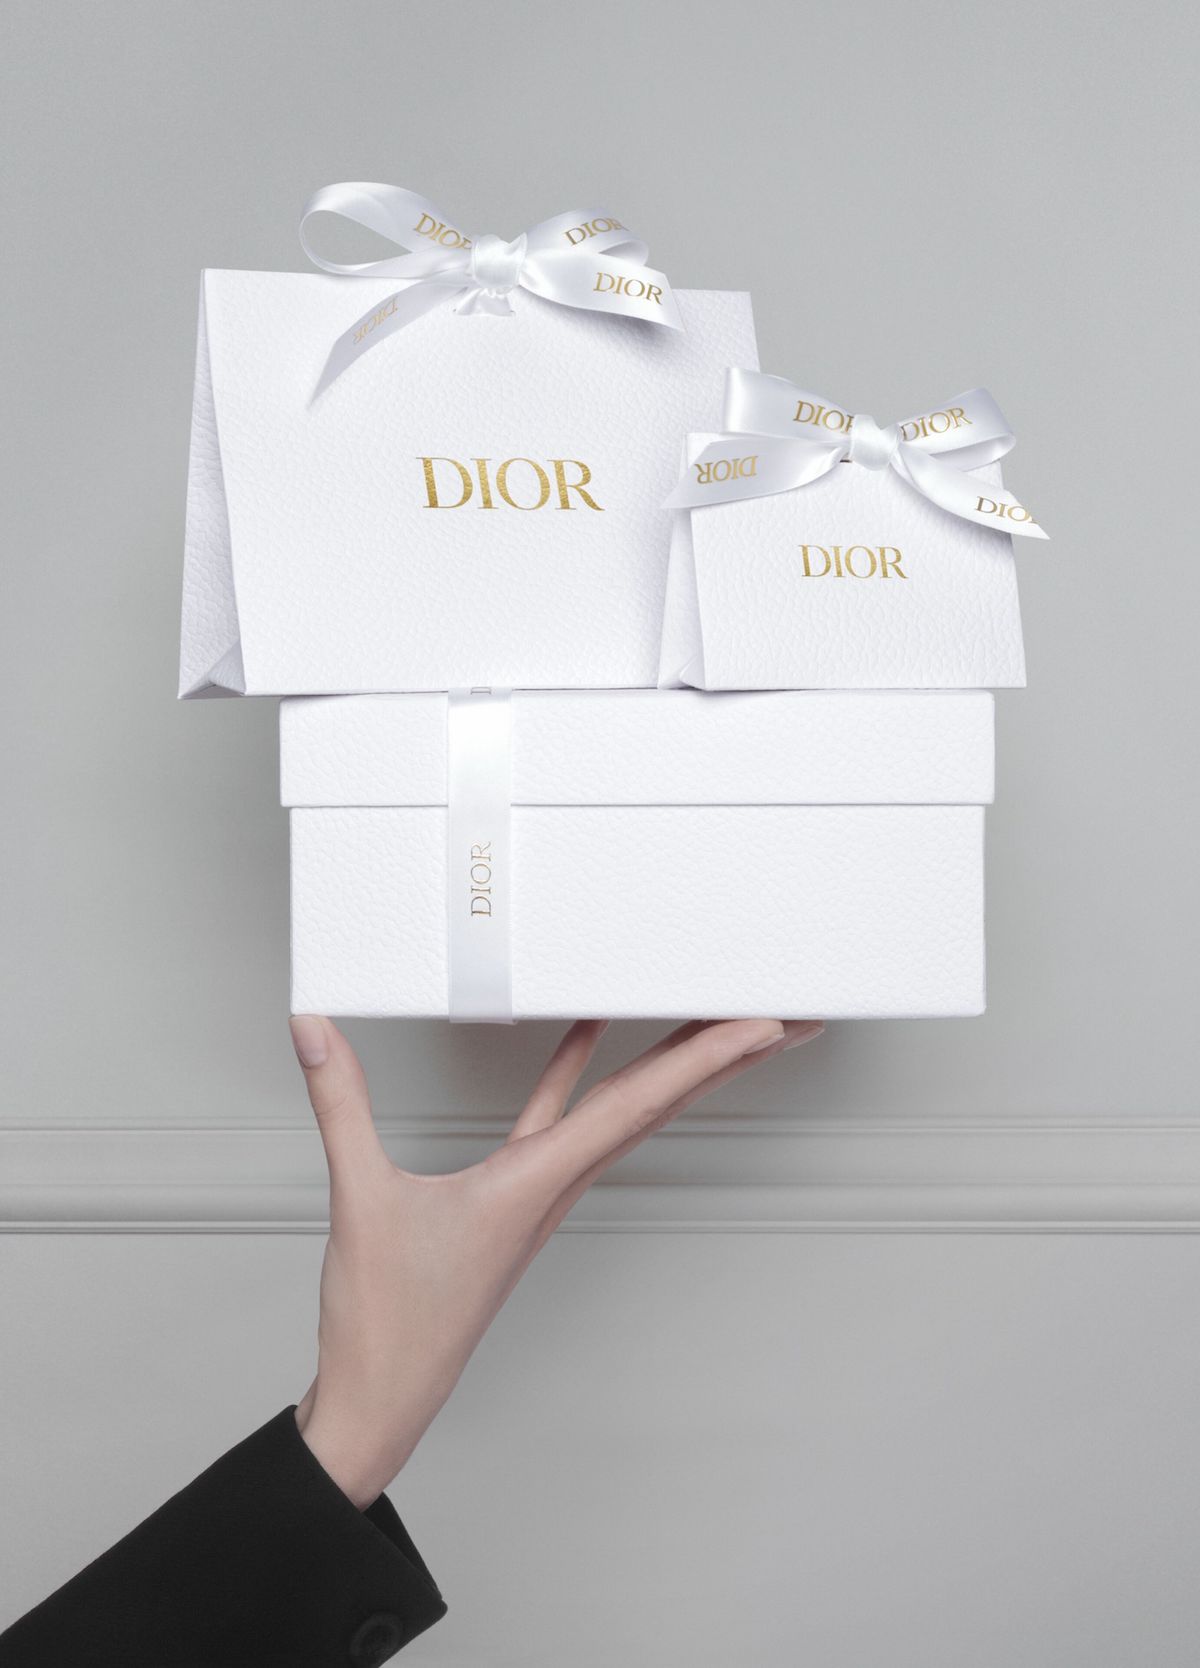 Dream in Dior Beauty this Holiday